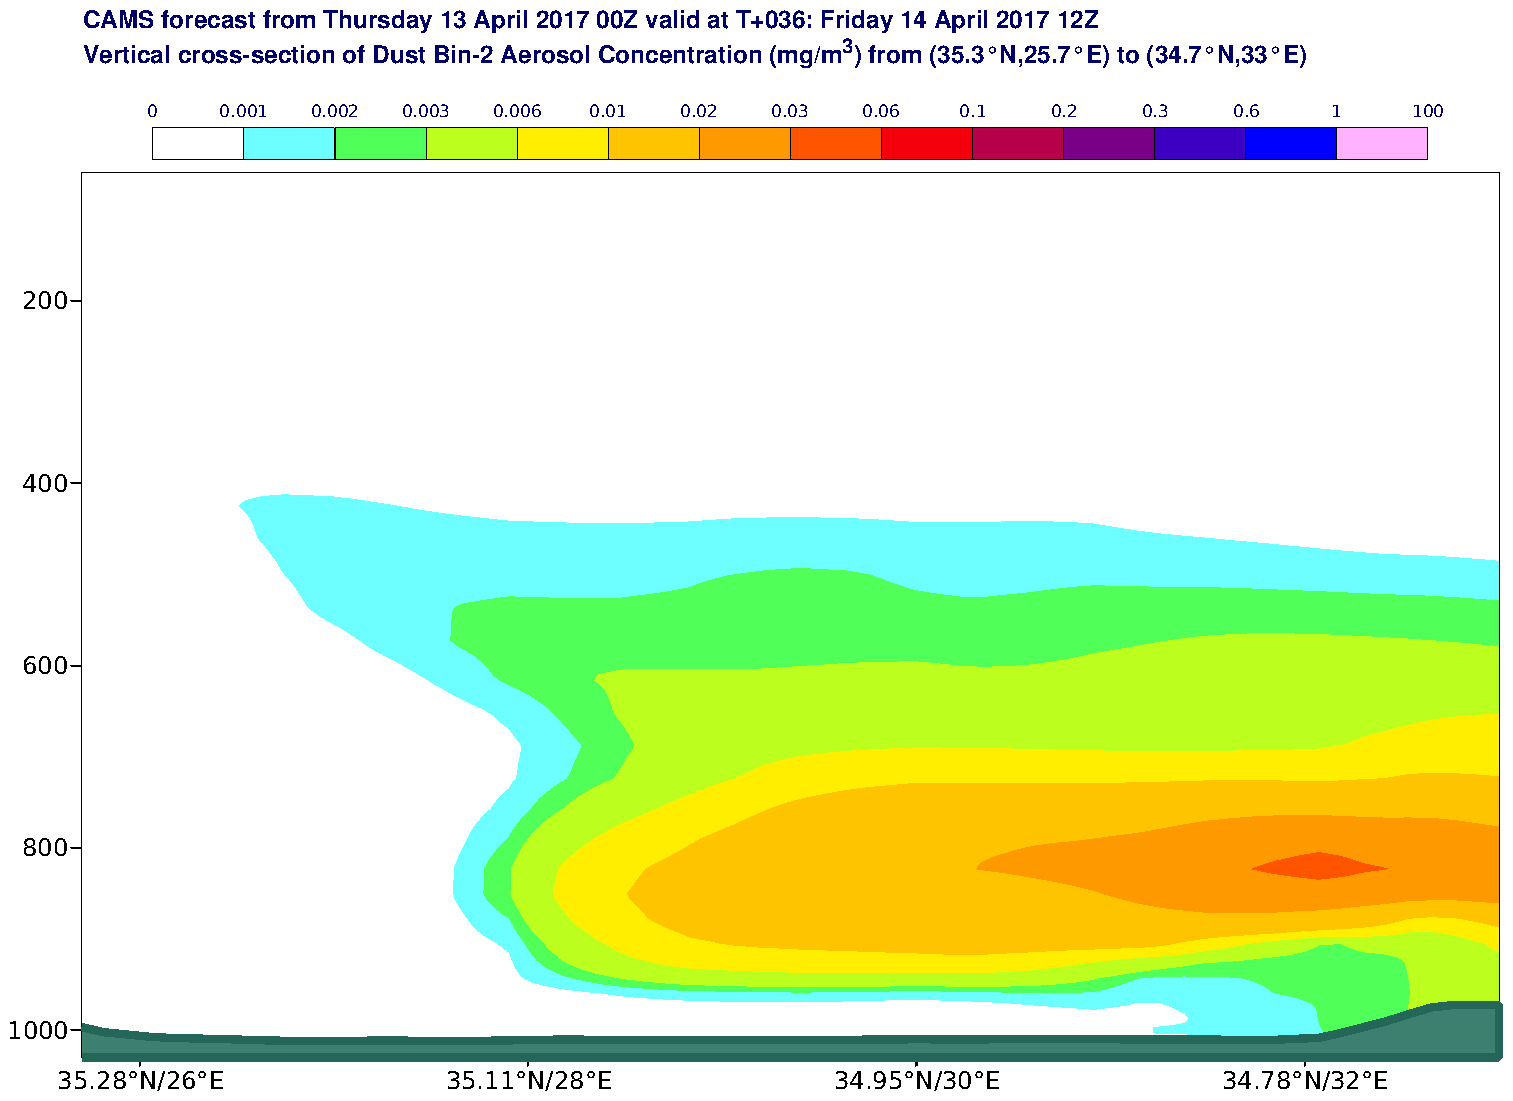 Vertical cross-section of Dust Bin-2 Aerosol Concentration (mg/m3) valid at T36 - 2017-04-14 12:00